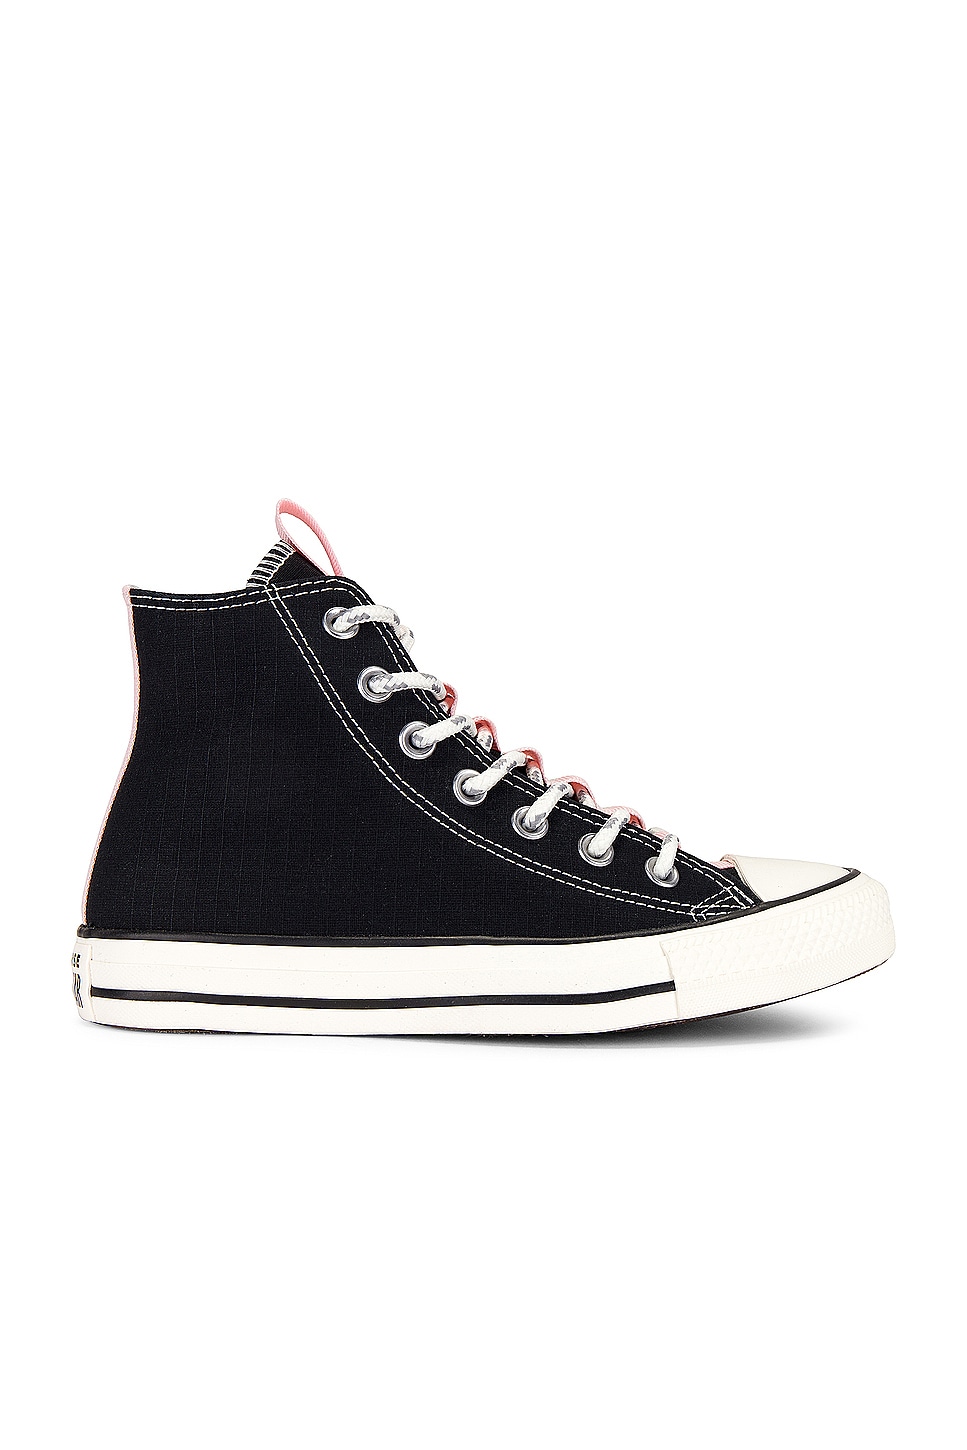 Image 1 of Converse Ctas Play On Utility in Black & Egret